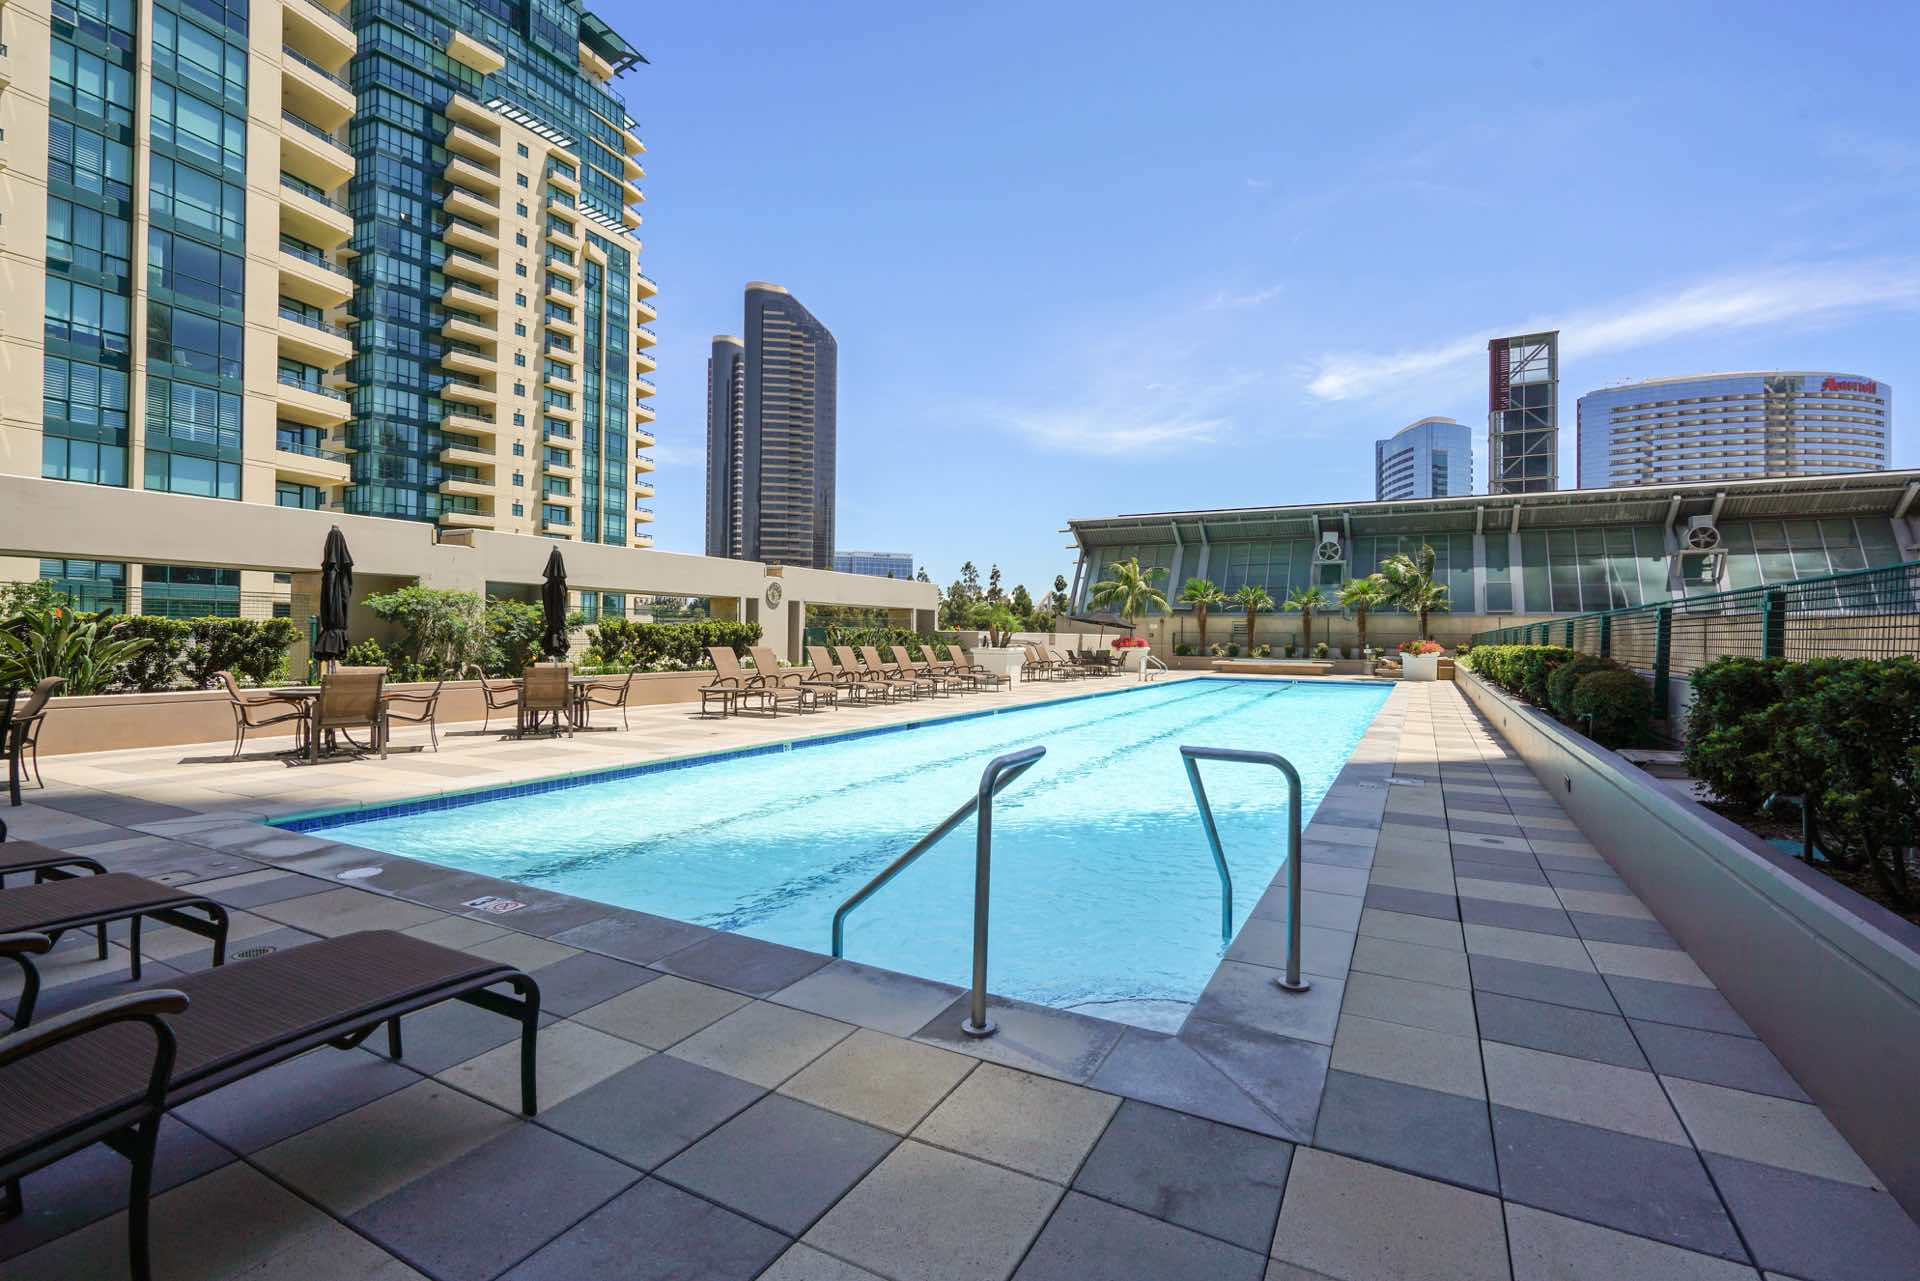 Lap pool in downtown San Diego high rise condo tower